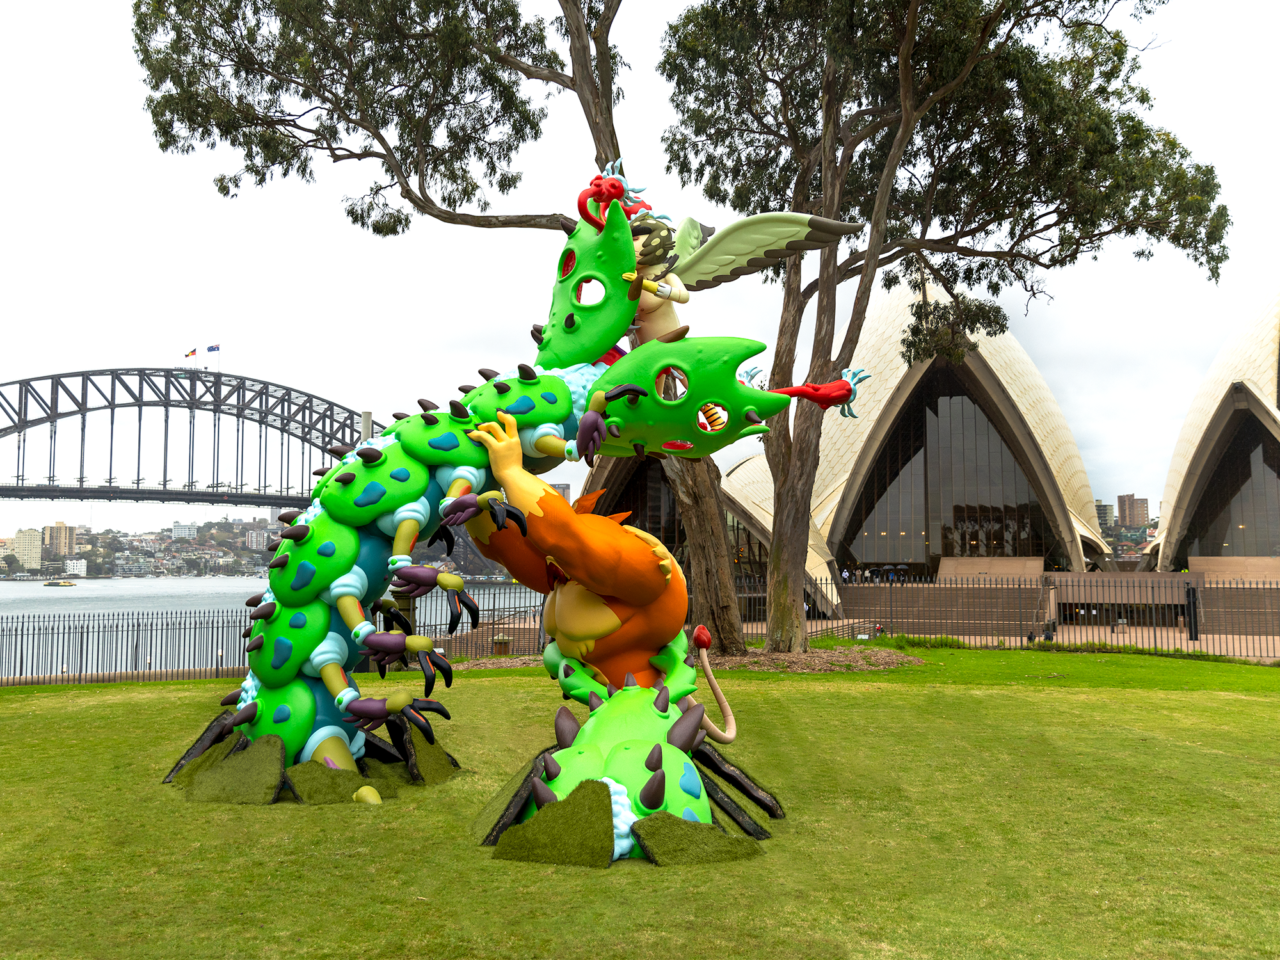 A sculpture of Rick and Morty character Birdperson at Bennelong Lawn in The Royal Botanic Garden in Sydney, Australia. The scene is part of the ongoing #WORMAGEDDON fan experience leading to the global release of Adult Swim’s Rick and Morty season six starting September 4, 2022. (Courtesy Adult Swim)